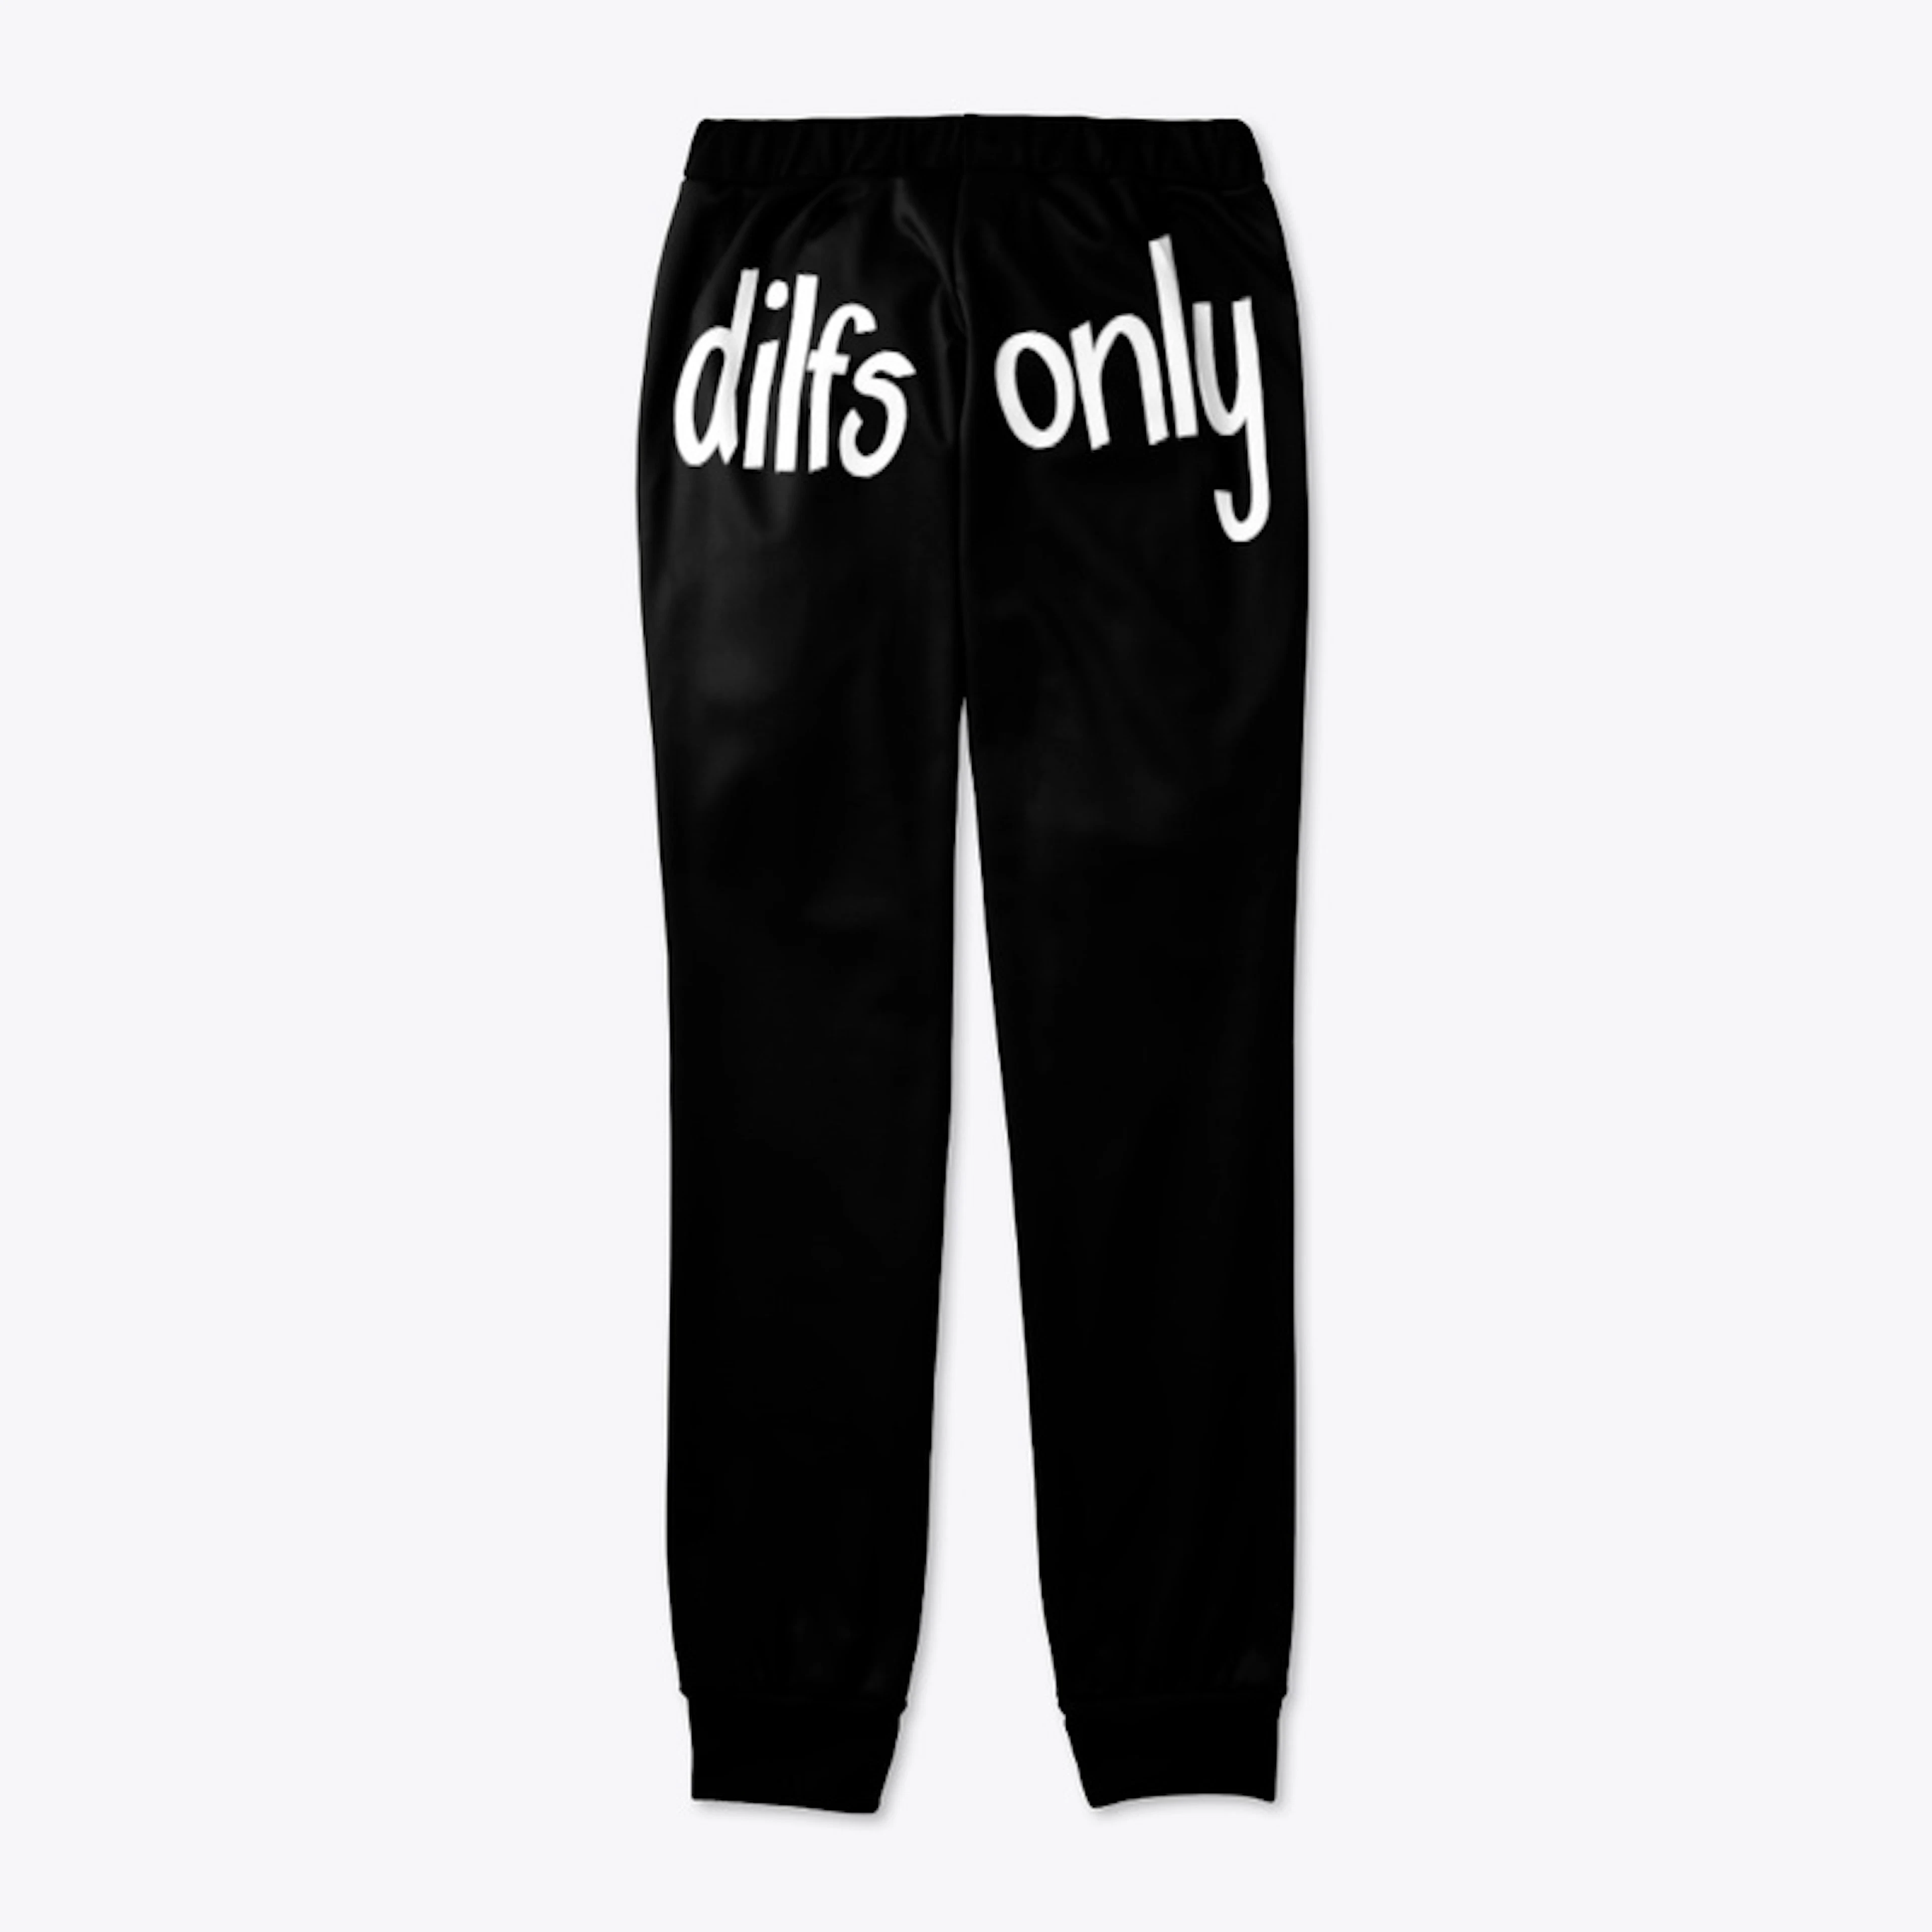 DILFS ONLY